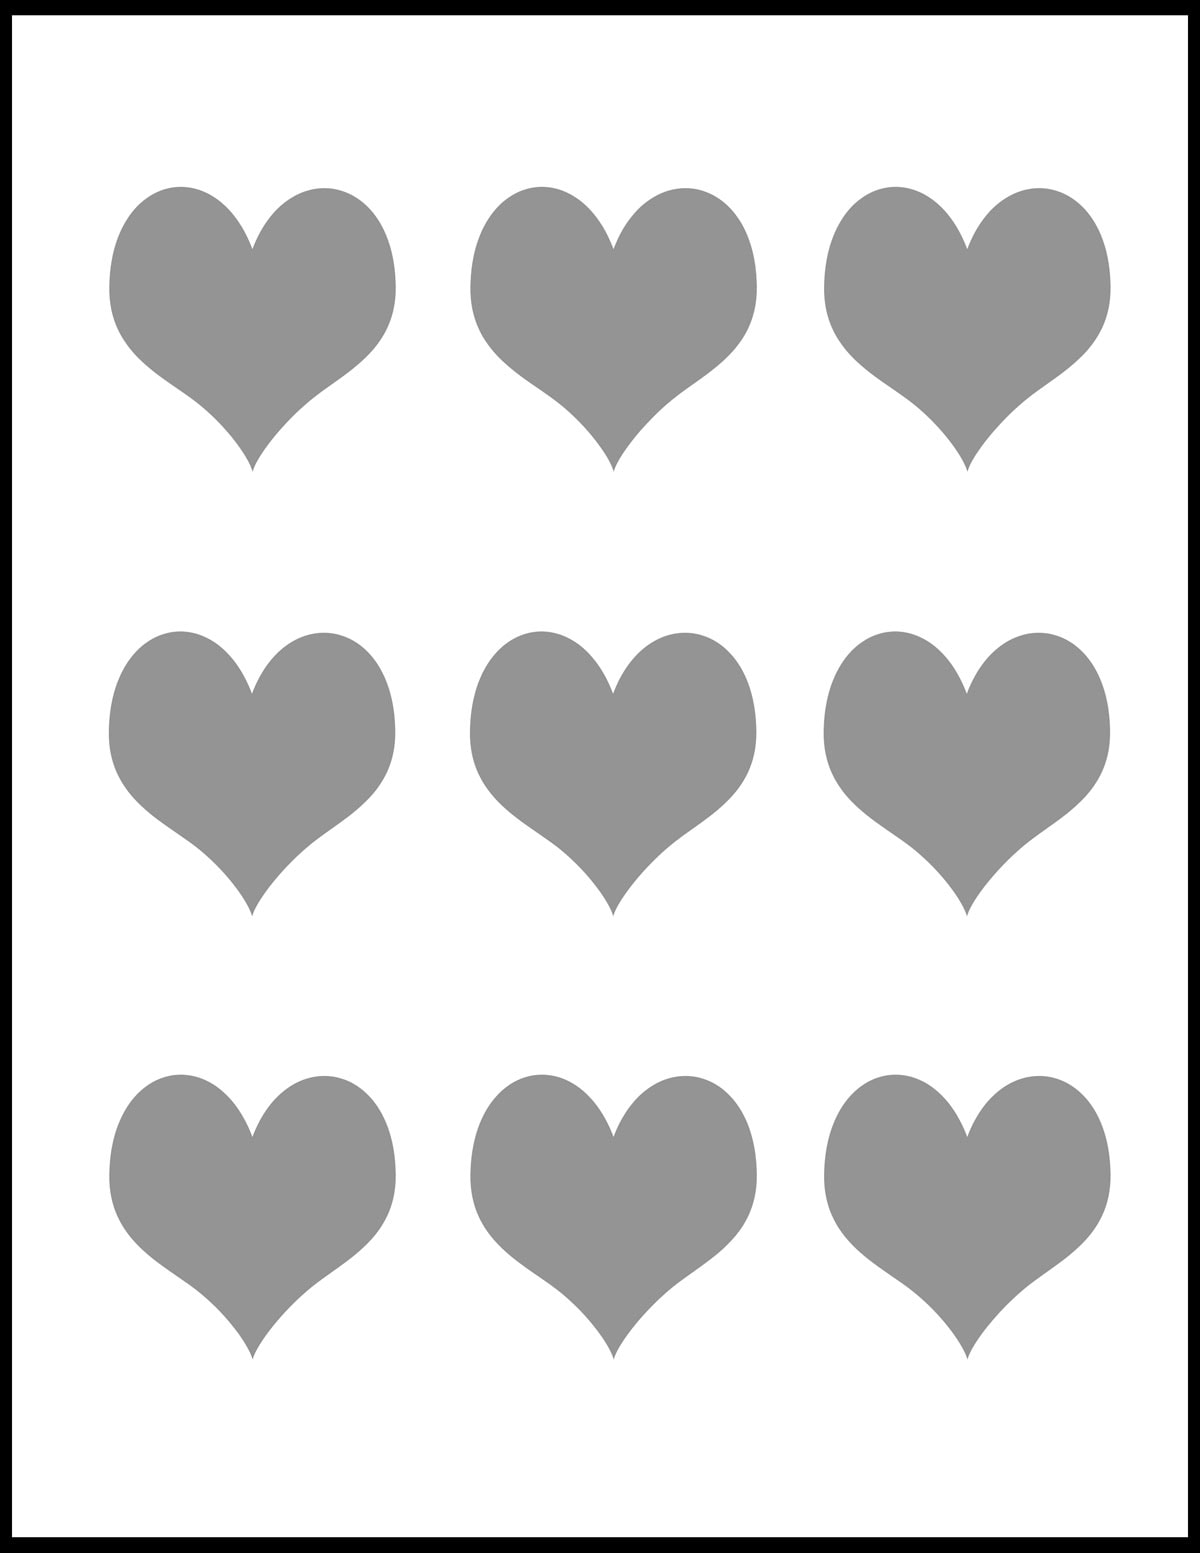 Illustrated heart shapes for making a Valentine Advent Calendar